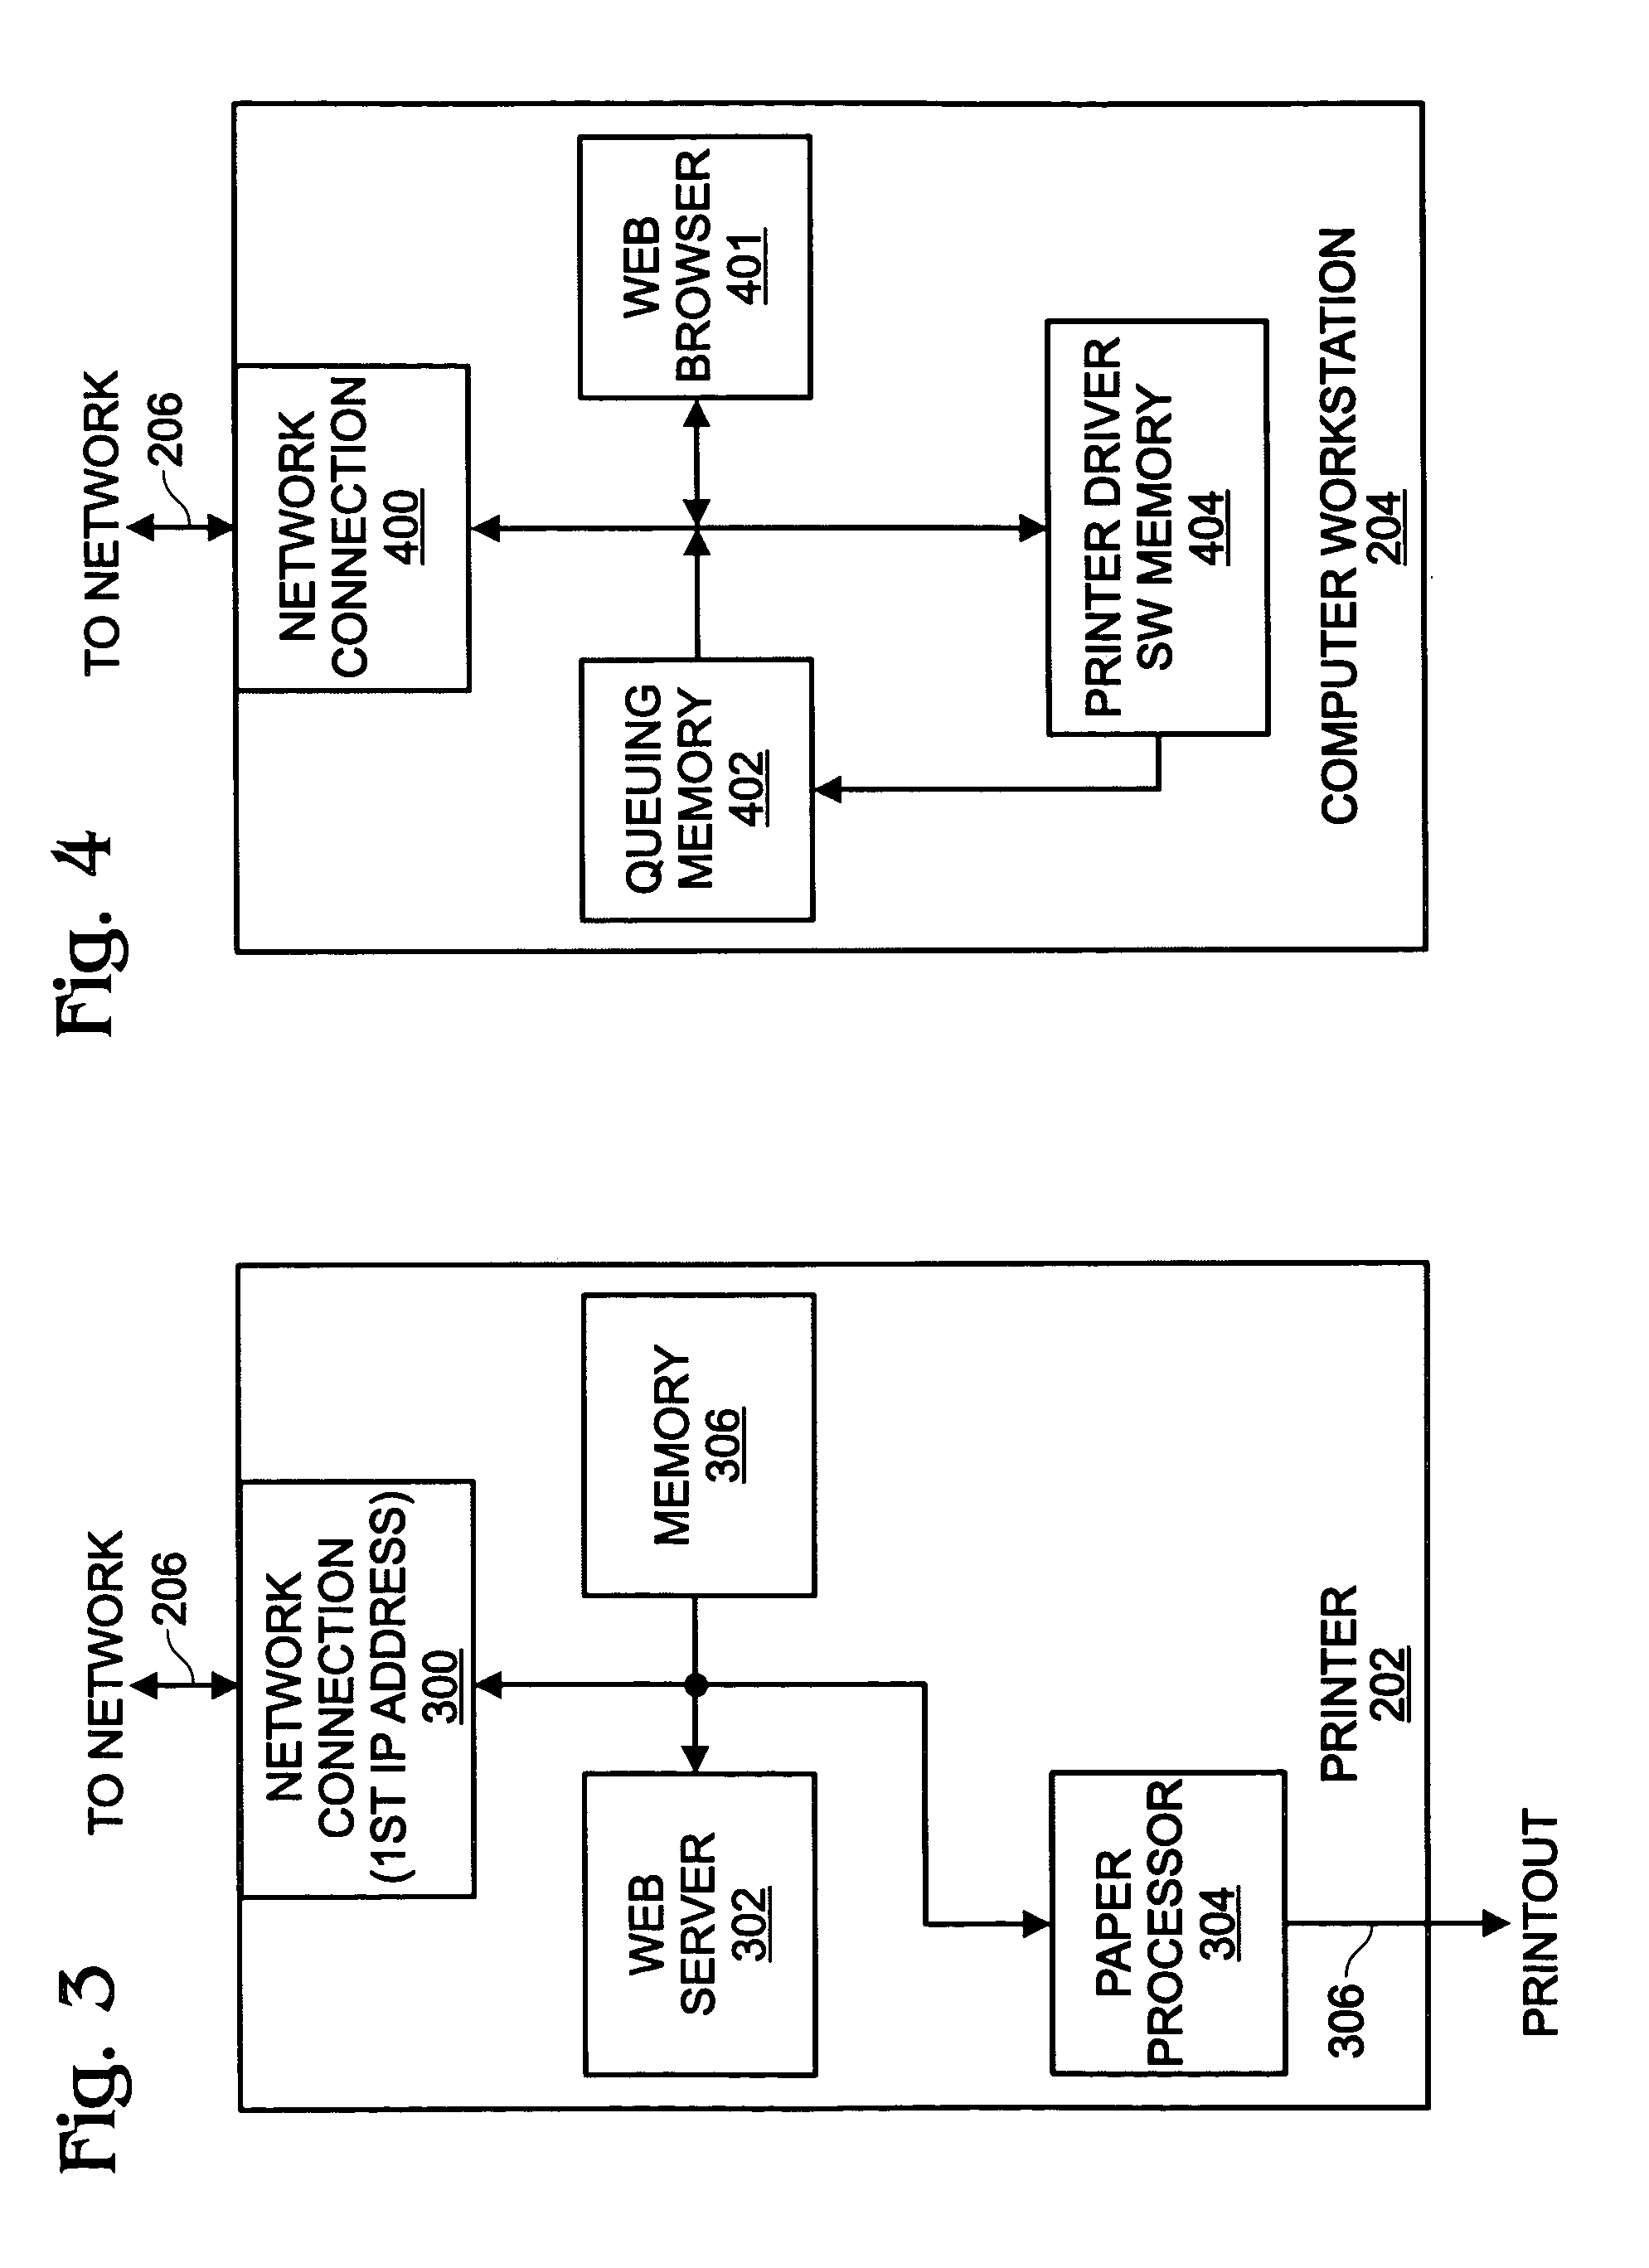 System and method for installing printer driver software